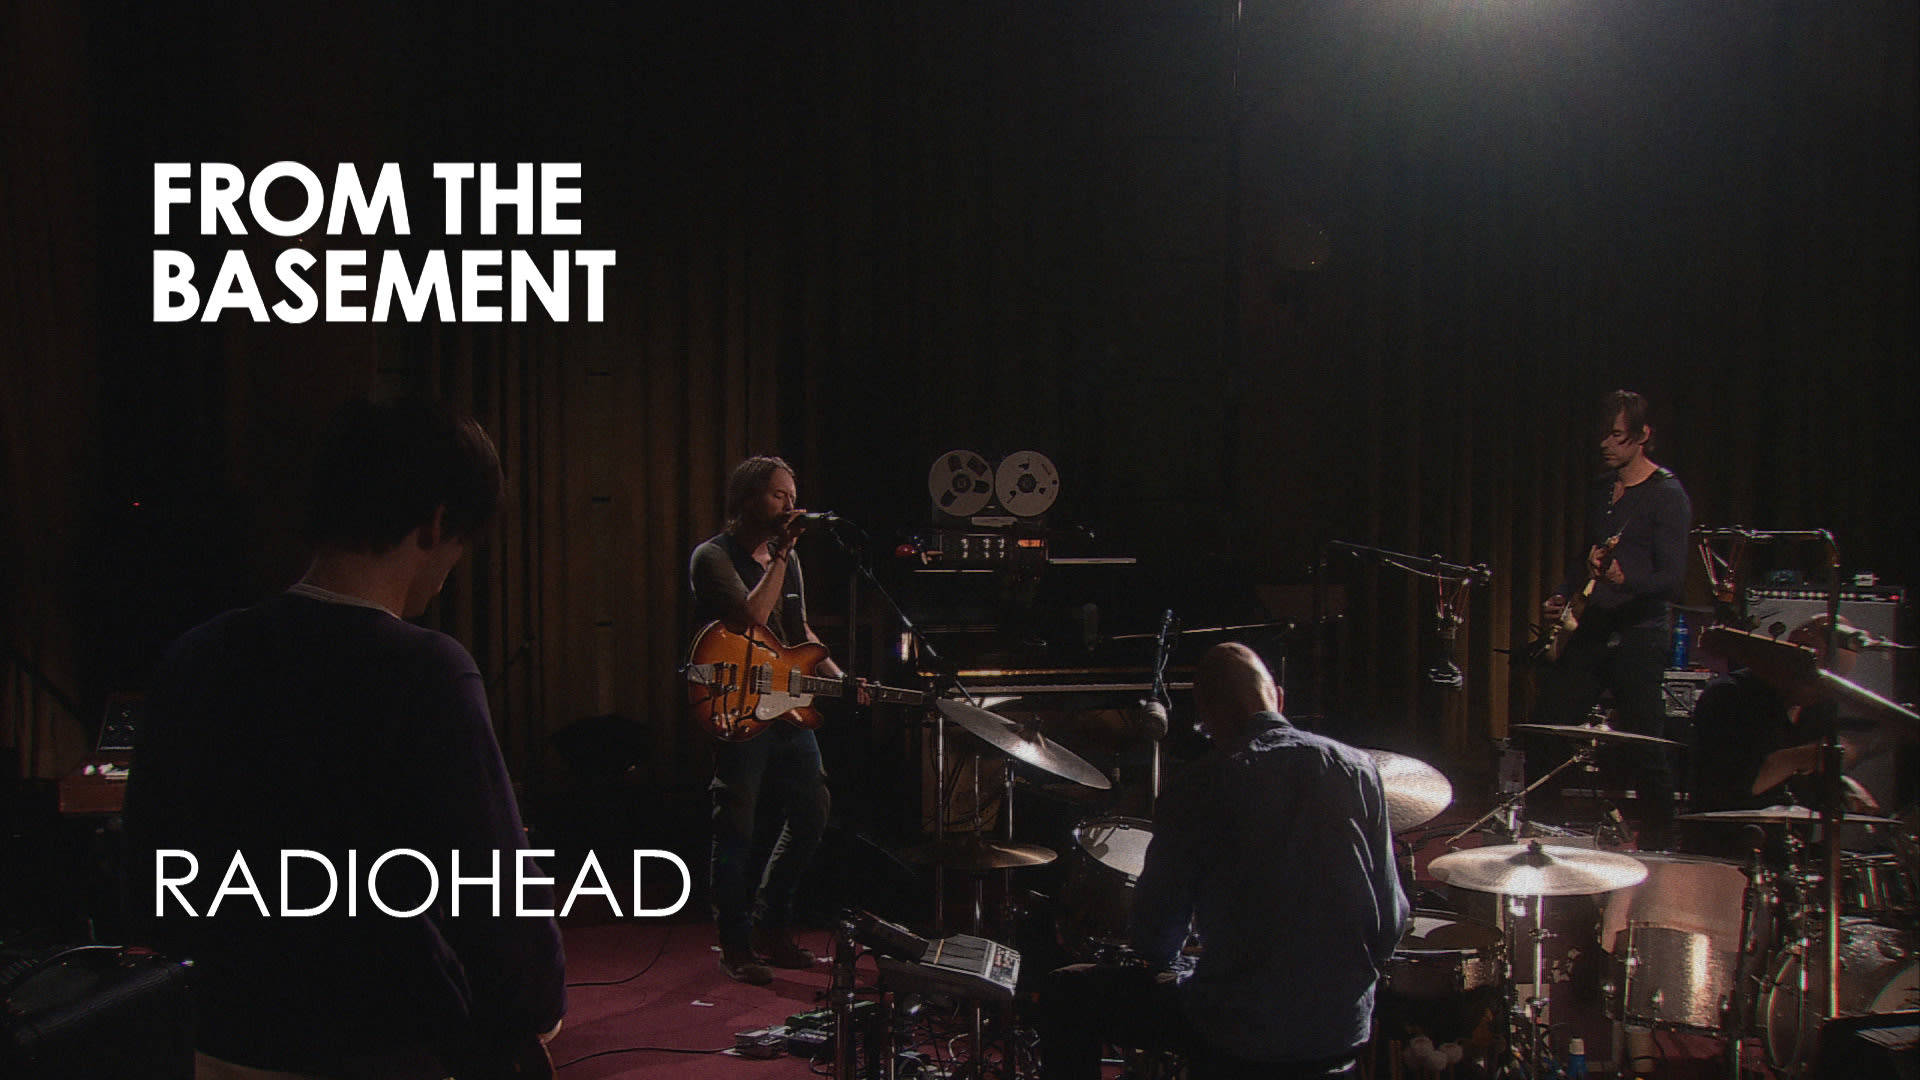 Download Radiohead From The Basement Wallpaper 